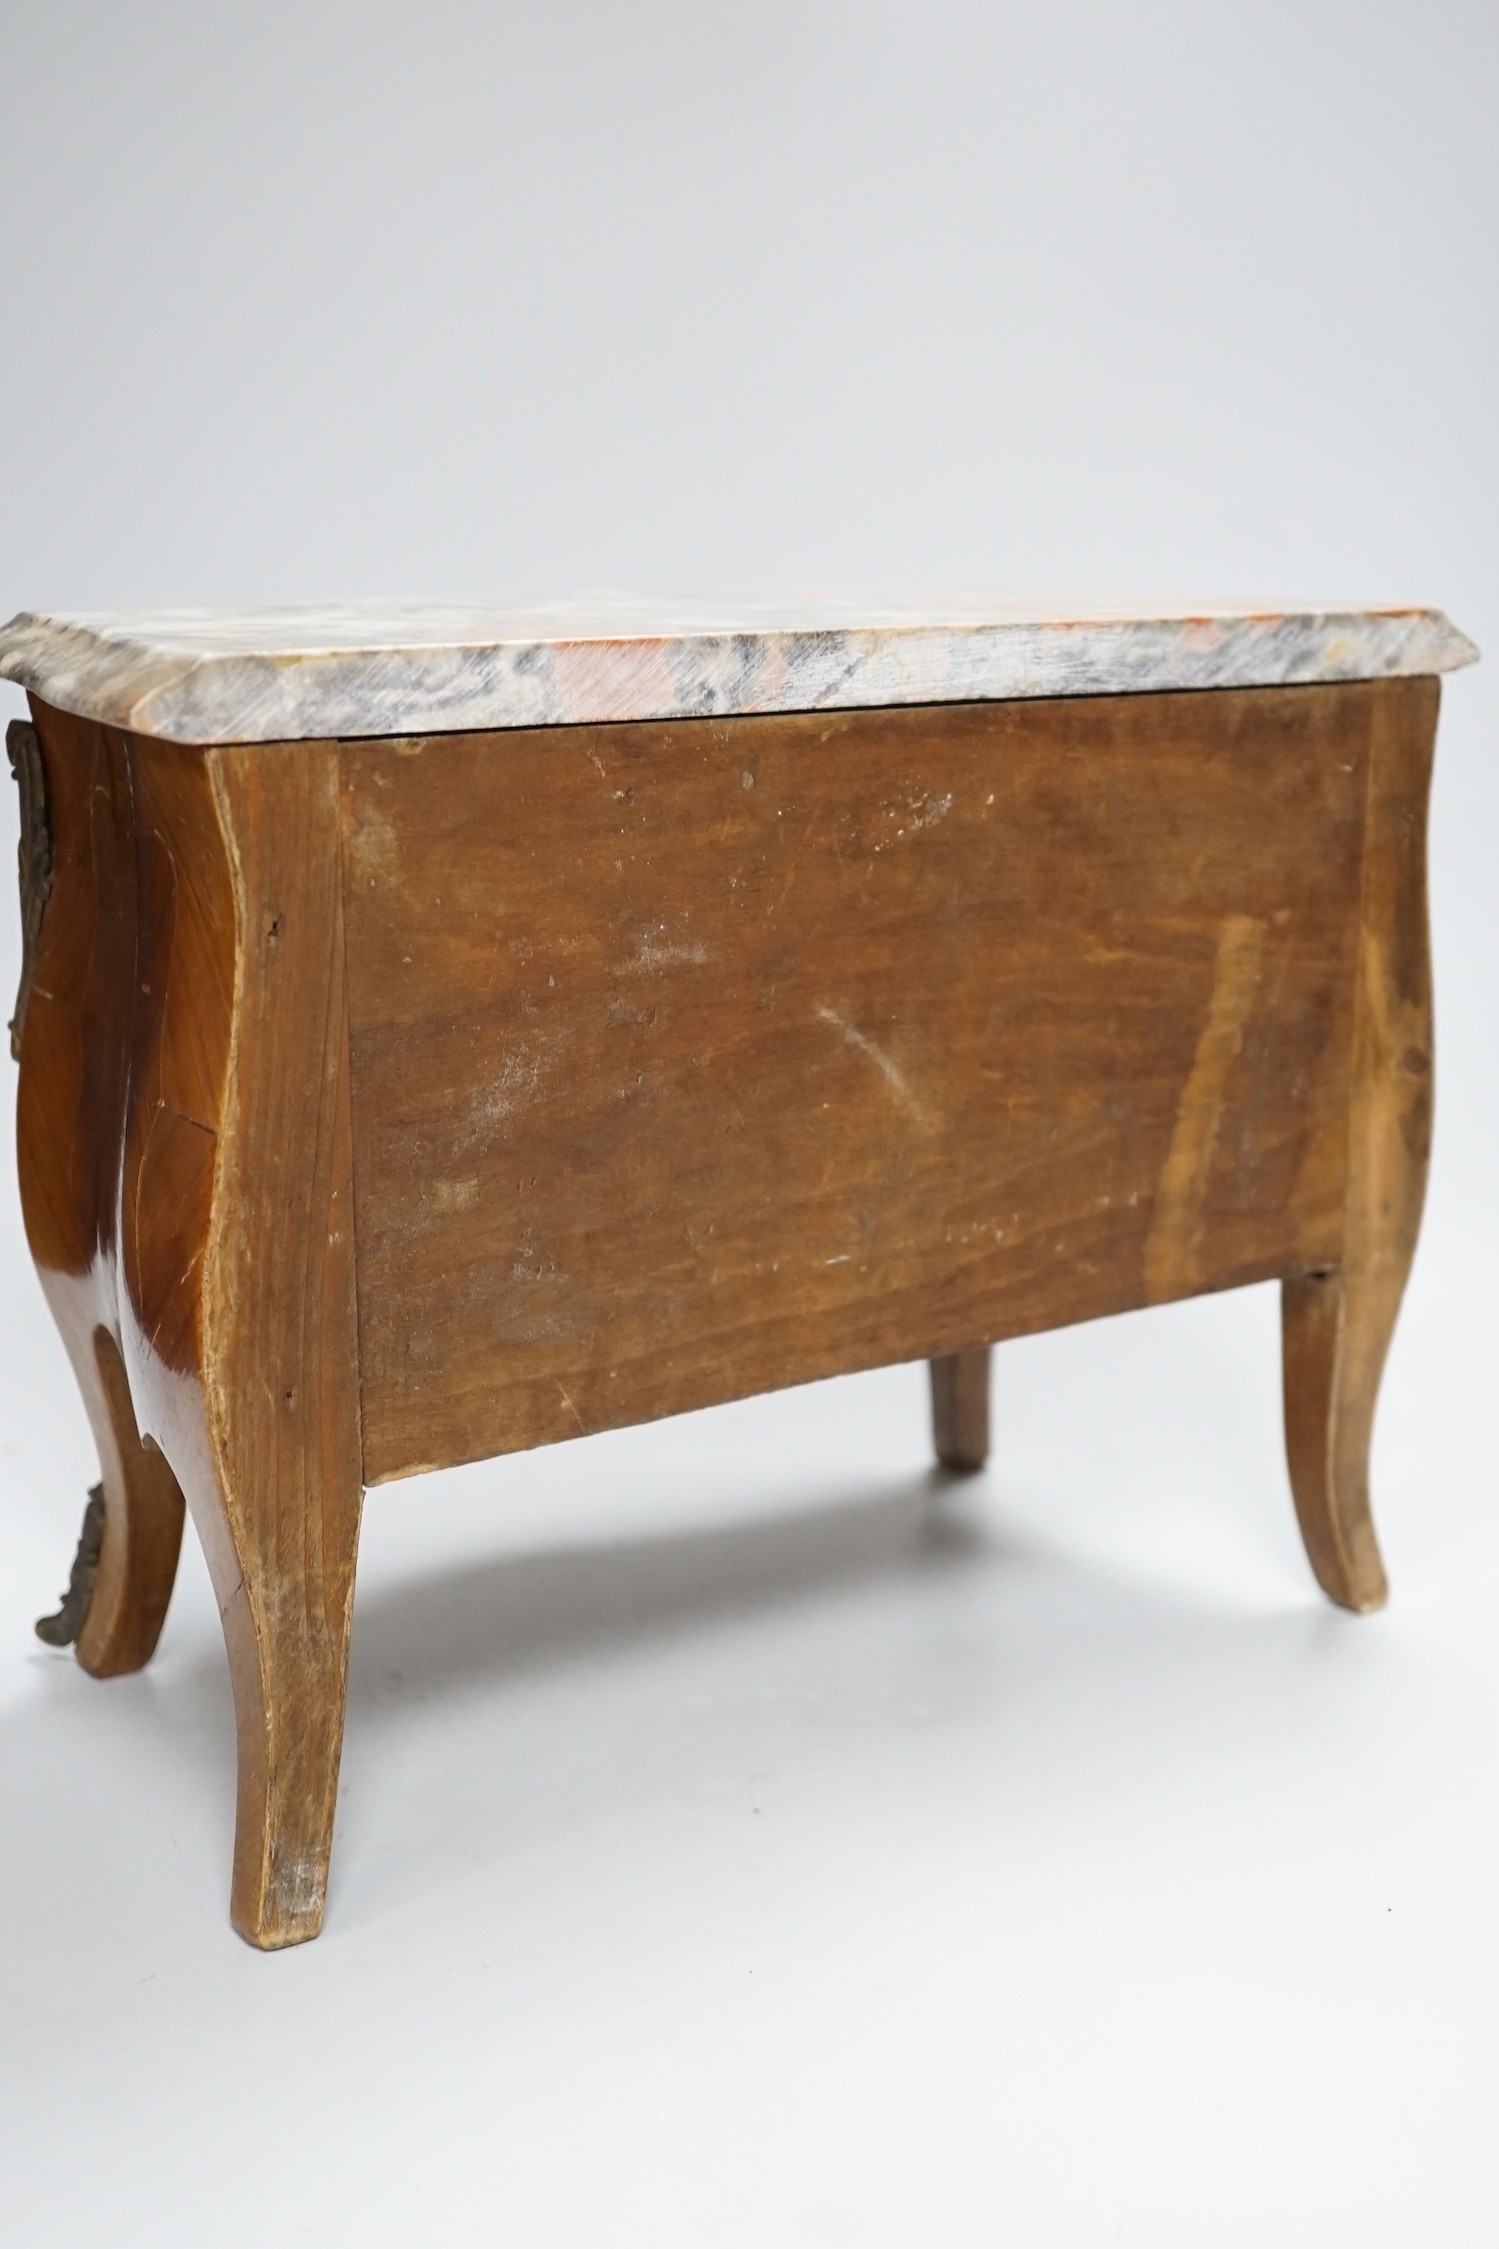 An Apprentice piece: Louis XV style miniature bowfronted French chest, with gilt mounts and pink and grey marble top. 27cm tall, 36cm wide, 17cm deep